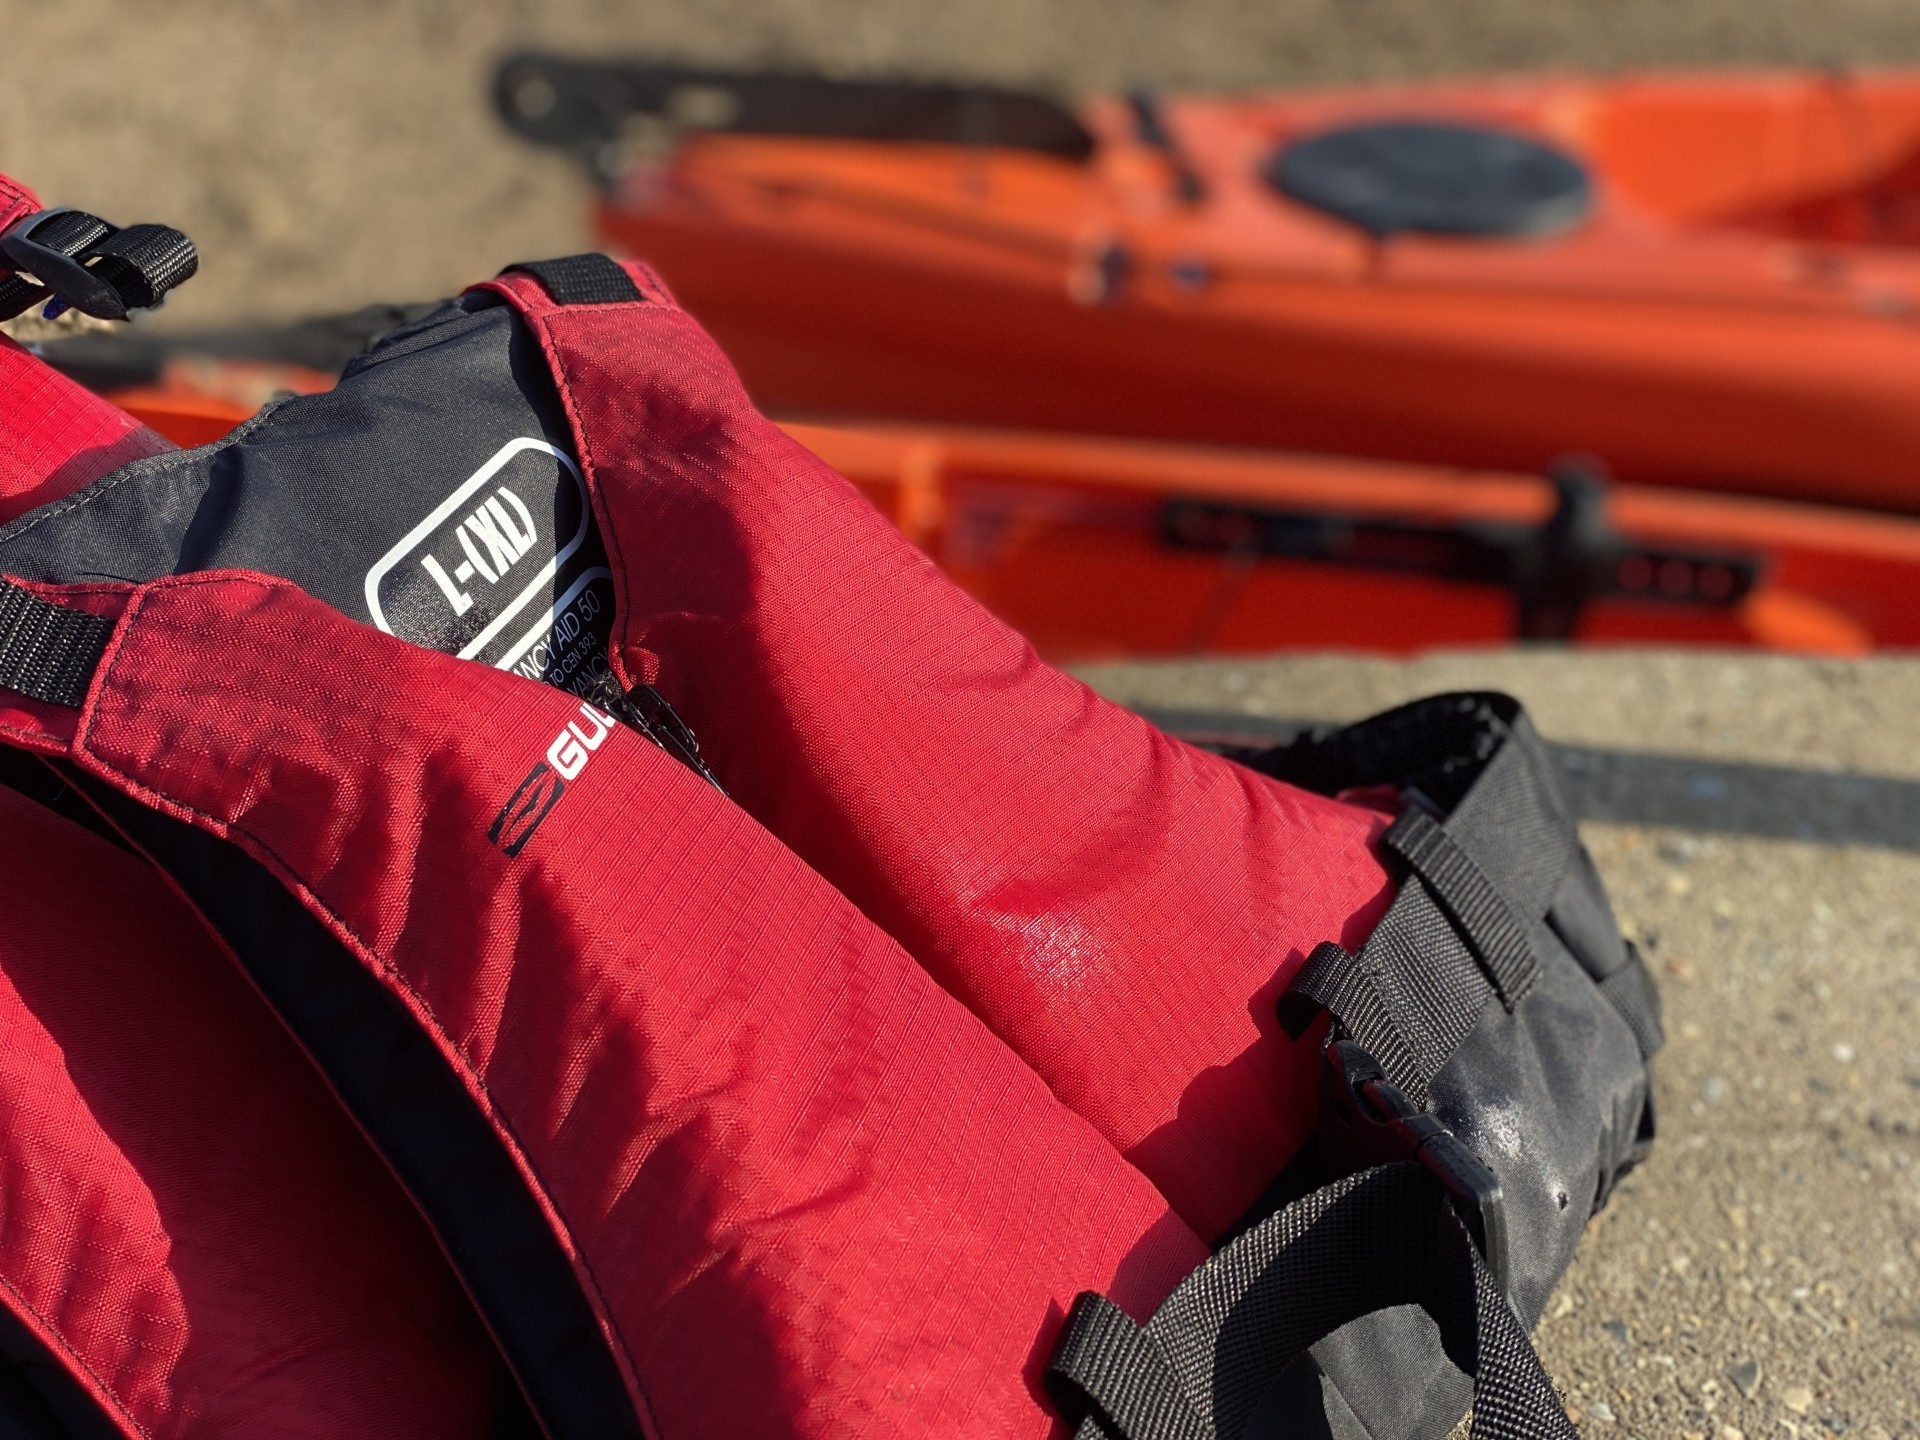 Red buoyancy aids ready for use.